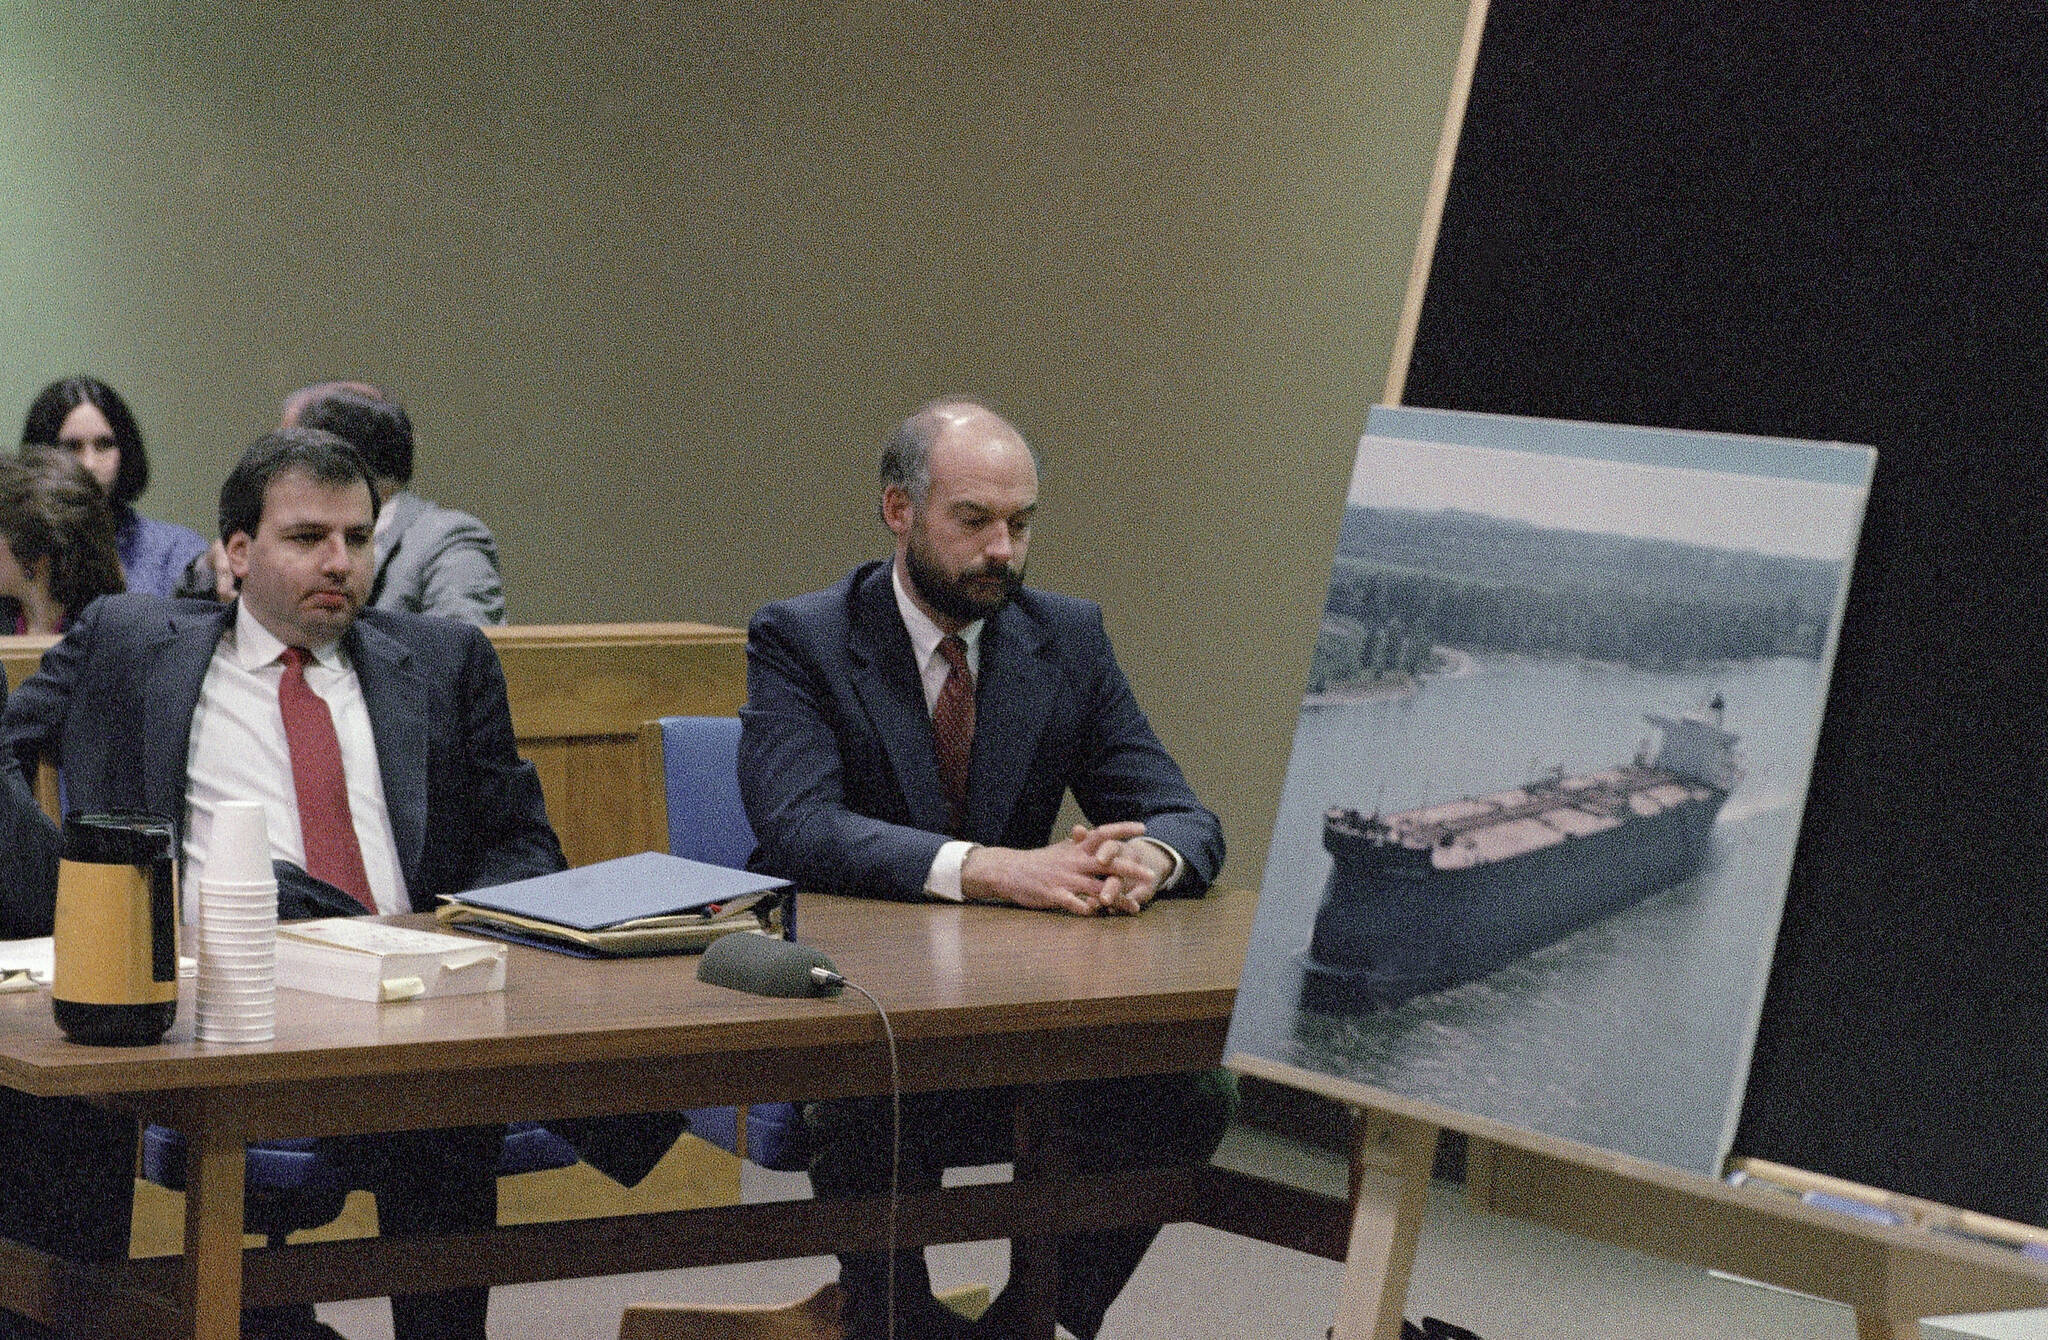 Fired Exxon Valdez skipper Joseph Hazelwood, right, sits with his lawyer Michael Chalos as a photograph of the tanker is displayed on an easel in Anchorage Superior Court, March 20, 1990. Hazelwood, the captain of the Exxon Valdez oil tanker that ran aground more than three decades ago in Alaska, causing one of the worst oil spills in U.S. history, has died in July 2022, the New York Times reported. He was 75. (AP Photo/Jack Smith, File)